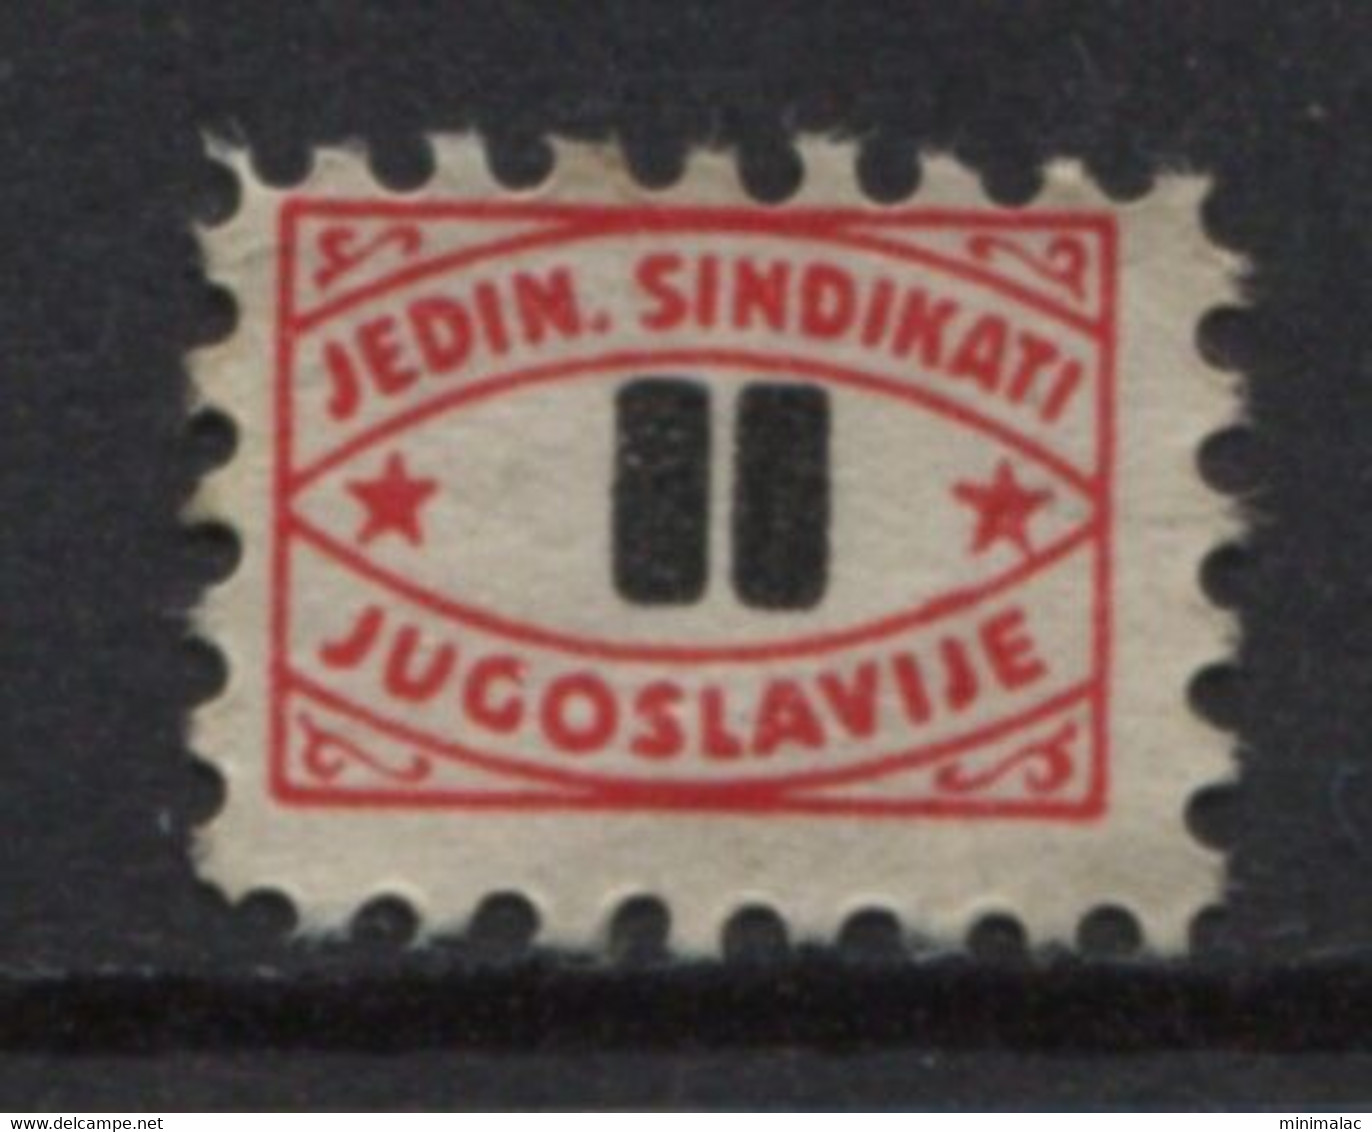 Yugoslavia 1945, Stamp For Membership, Labor Union, Administrative Stamp - Revenue, Tax Stamp, II - Oficiales